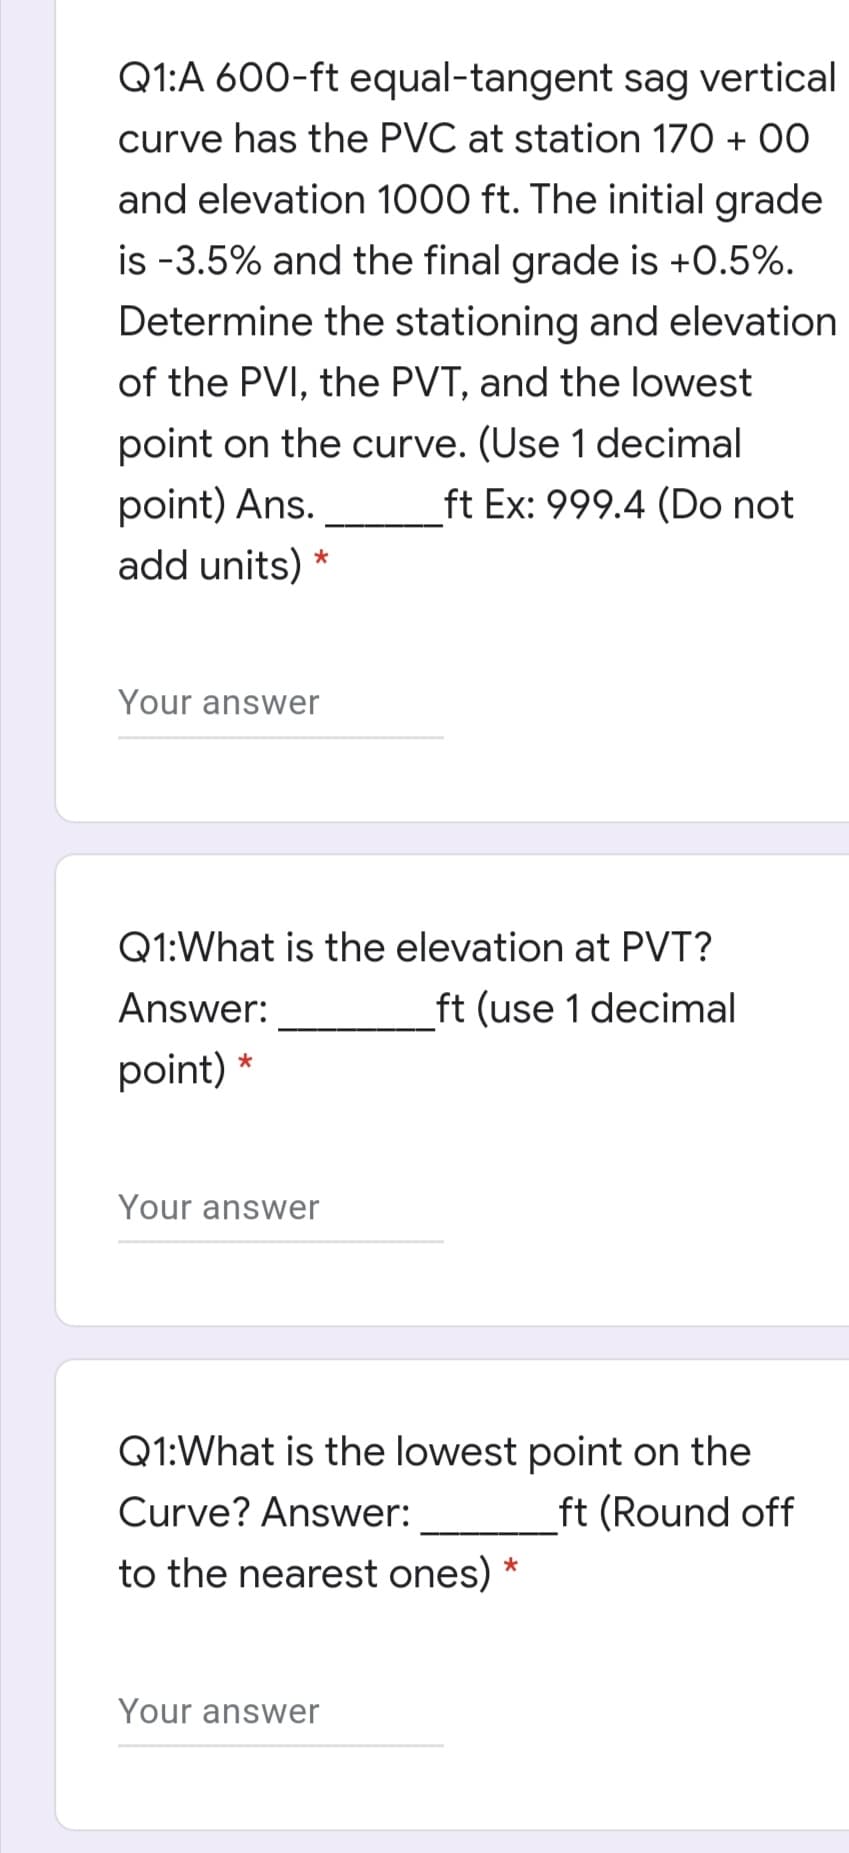 Q1:A 600-ft equal-tangent sag vertical
curve has the PVC at station 170 + 00
and elevation 1000 ft. The initial grade
is -3.5% and the final grade is +0.5%.
Determine the stationing and elevation
of the PVI, the PVT, and the lowest
point on the curve. (Use 1 decimal
point) Ans.
add units)
ft Ex: 999.4 (Do not
*
Your answer
Q1:What is the elevation at PVT?
Answer:
ft (use 1 decimal
point)
Your answer
Q1:What is the lowest point on the
Curve? Answer:
ft (Round off
to the nearest ones) *
Your answer
